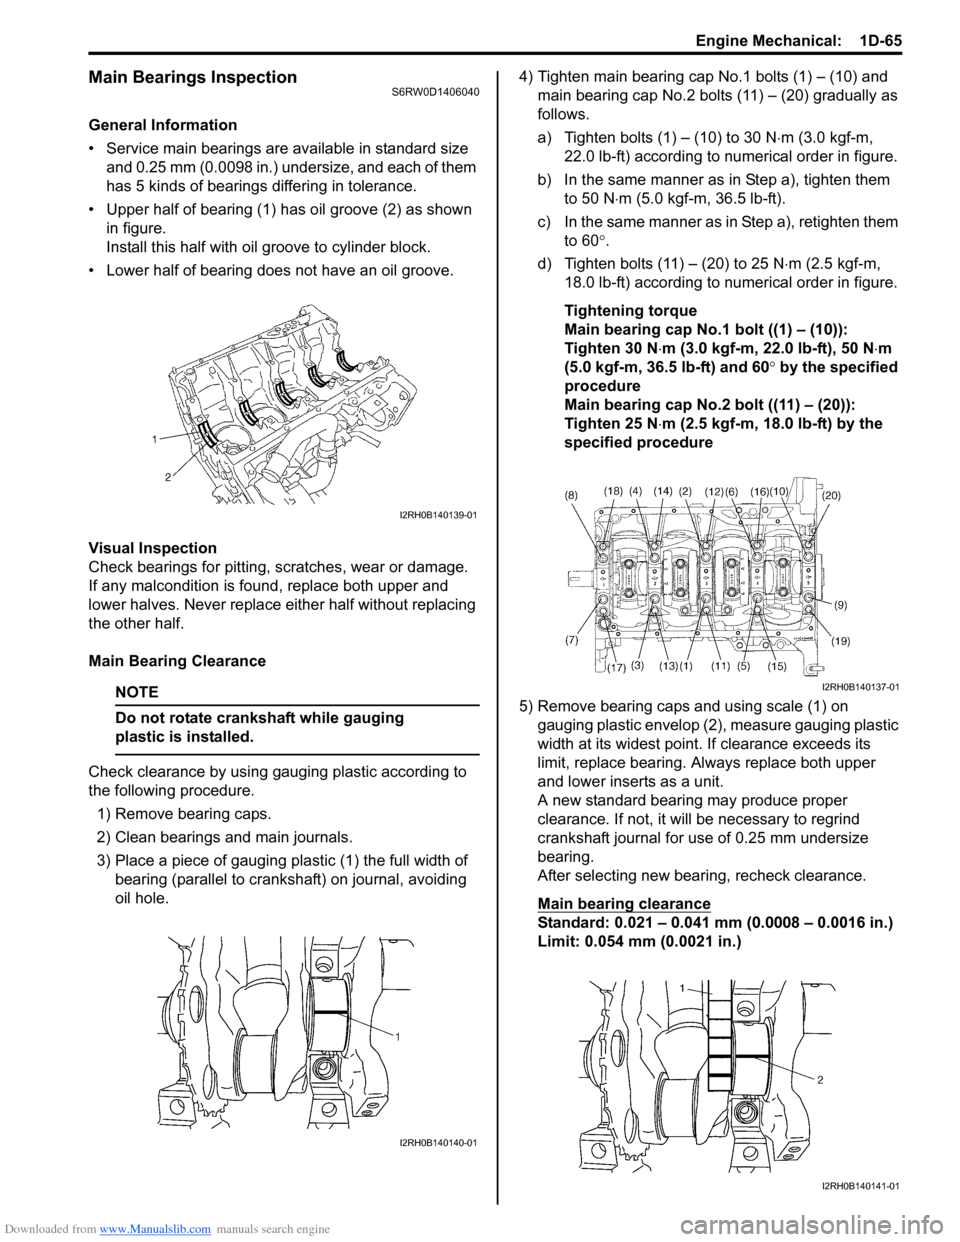 SUZUKI SX4 2006 1.G Service Service Manual Downloaded from www.Manualslib.com manuals search engine Engine Mechanical:  1D-65
Main Bearings InspectionS6RW0D1406040
General Information
• Service main bearings are available in standard size 
a